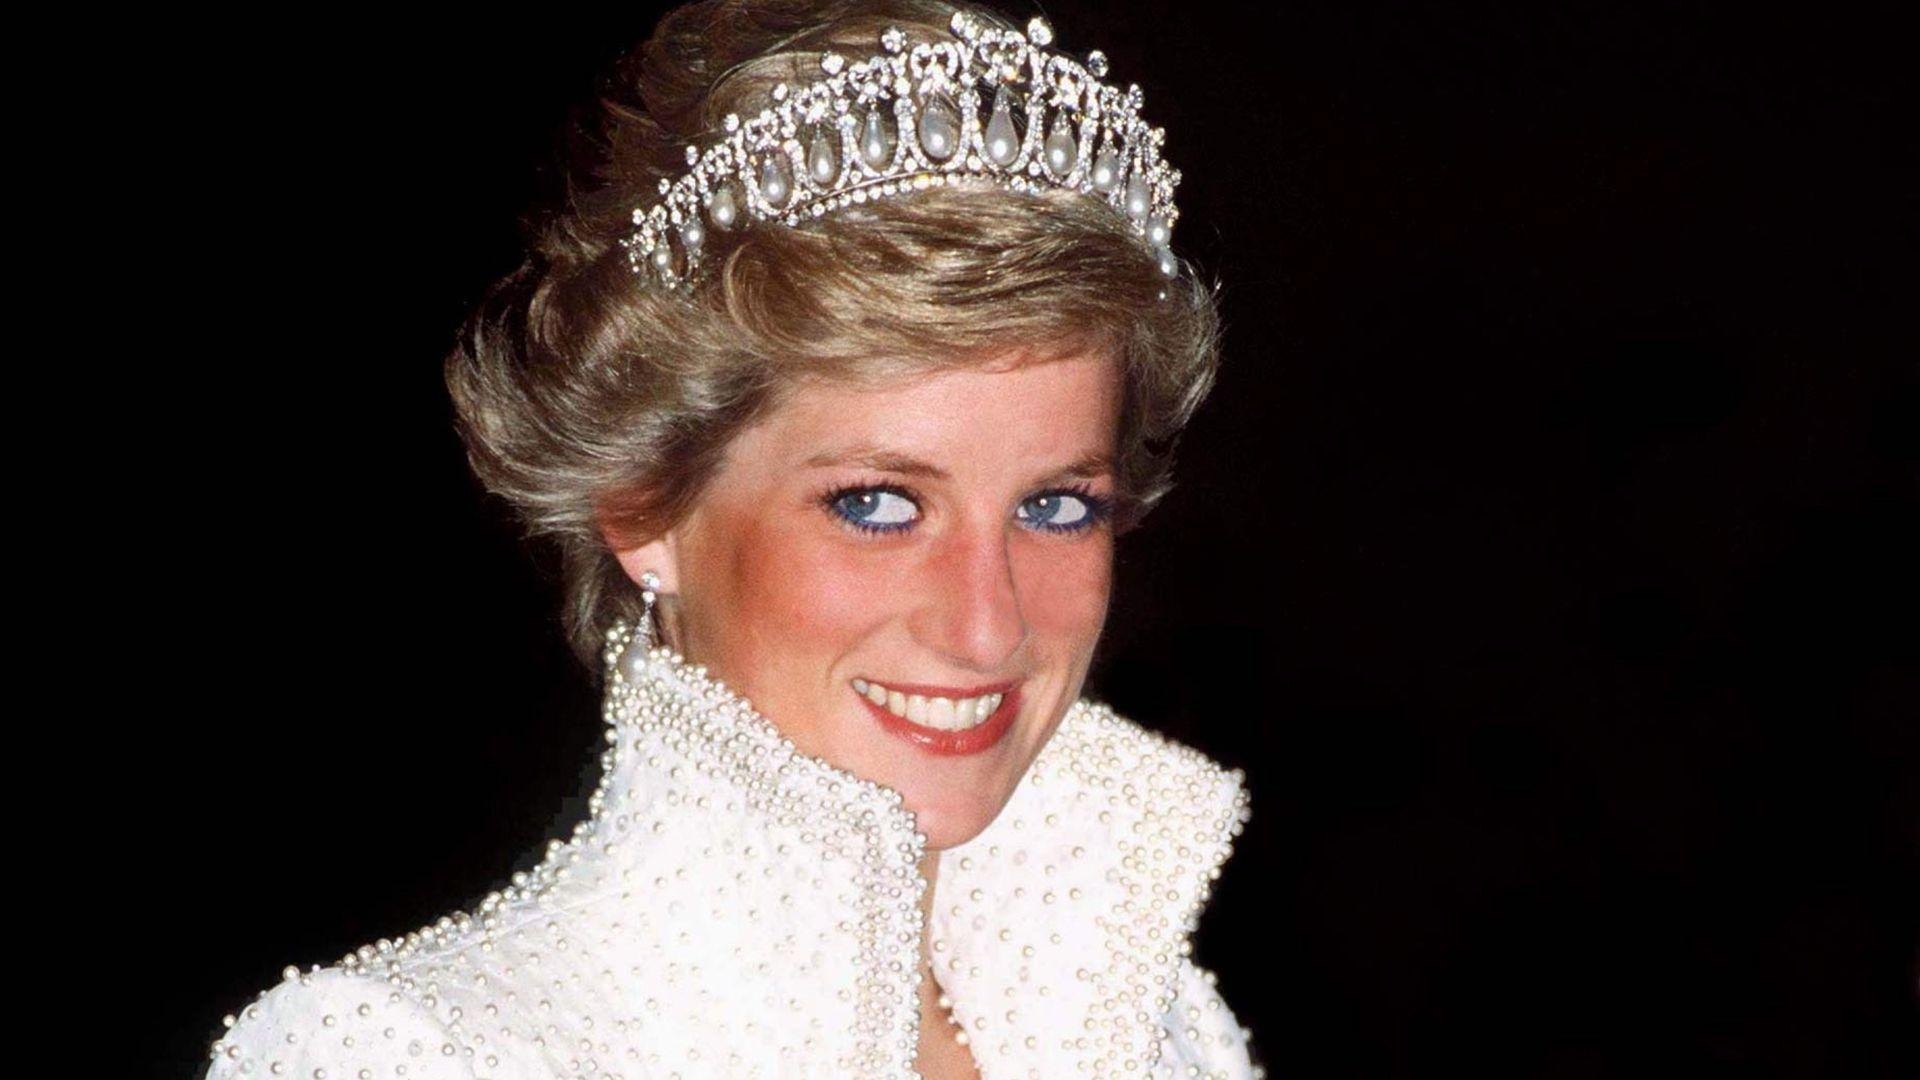 Princess Diana: Diana's interview with Martin Bashir was watched by 23 million people in the United Kingdom. 1920x1080 Full HD Background.